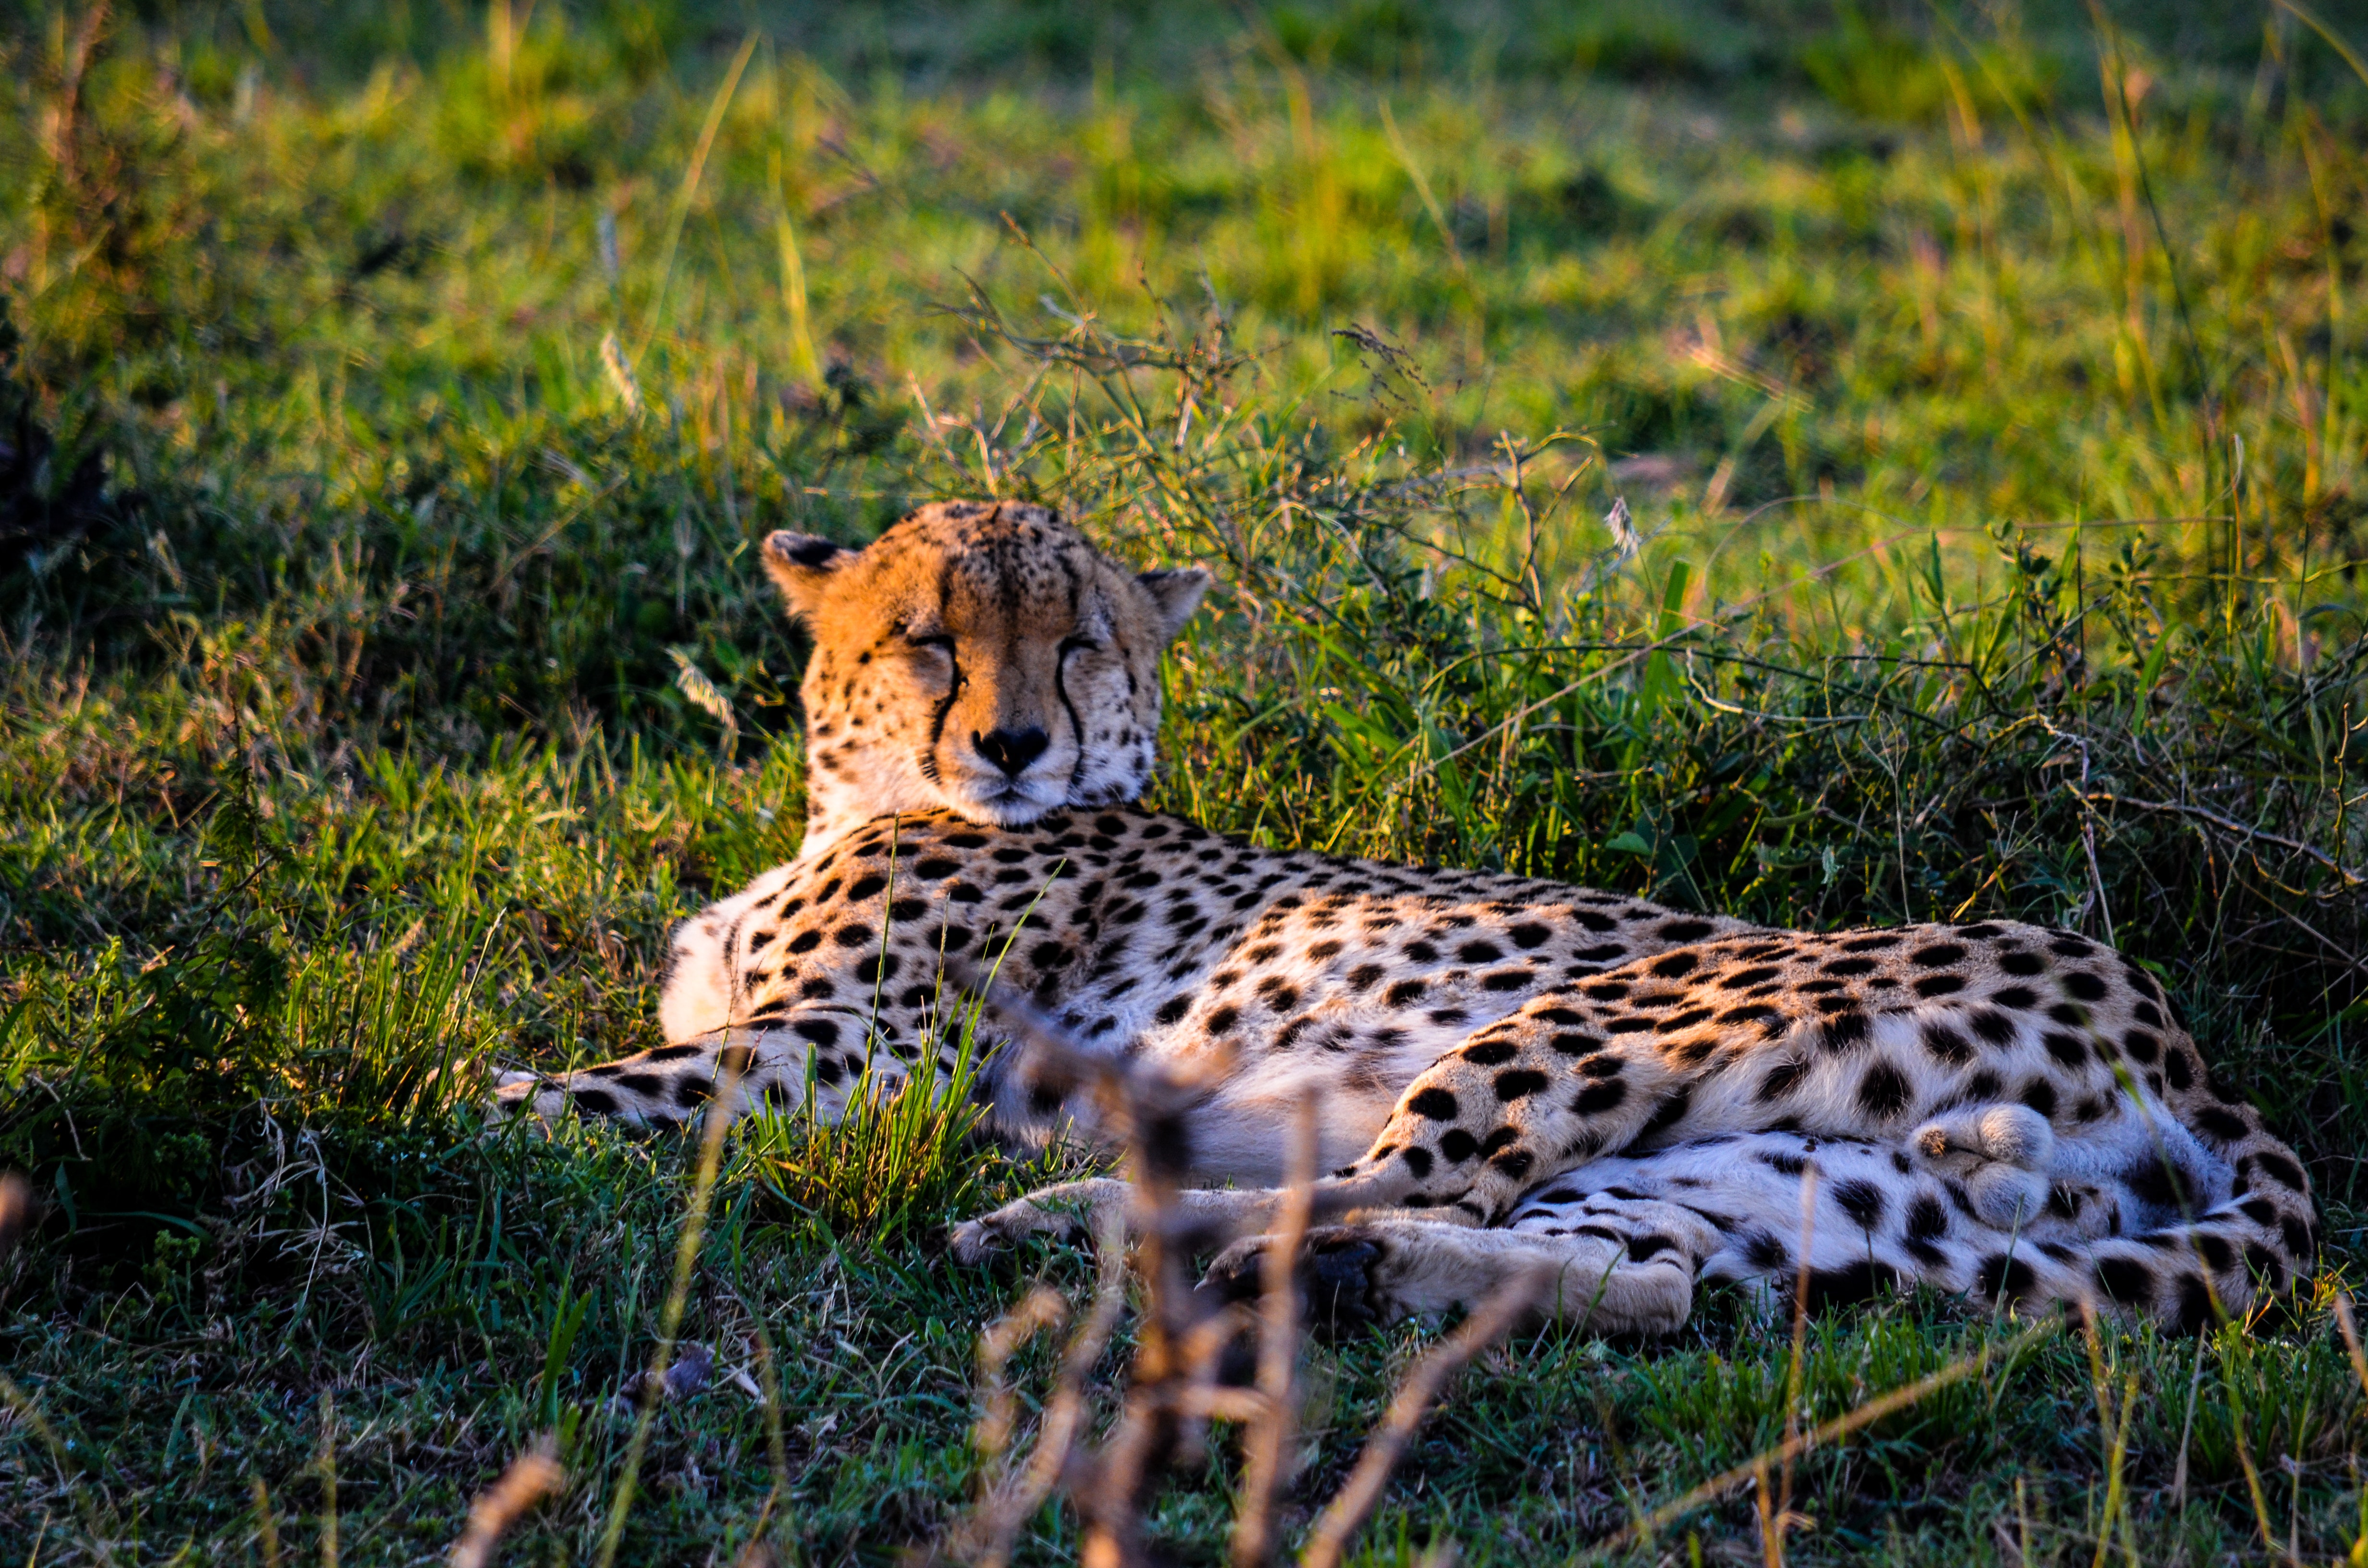 Leopard lying on the grass photo